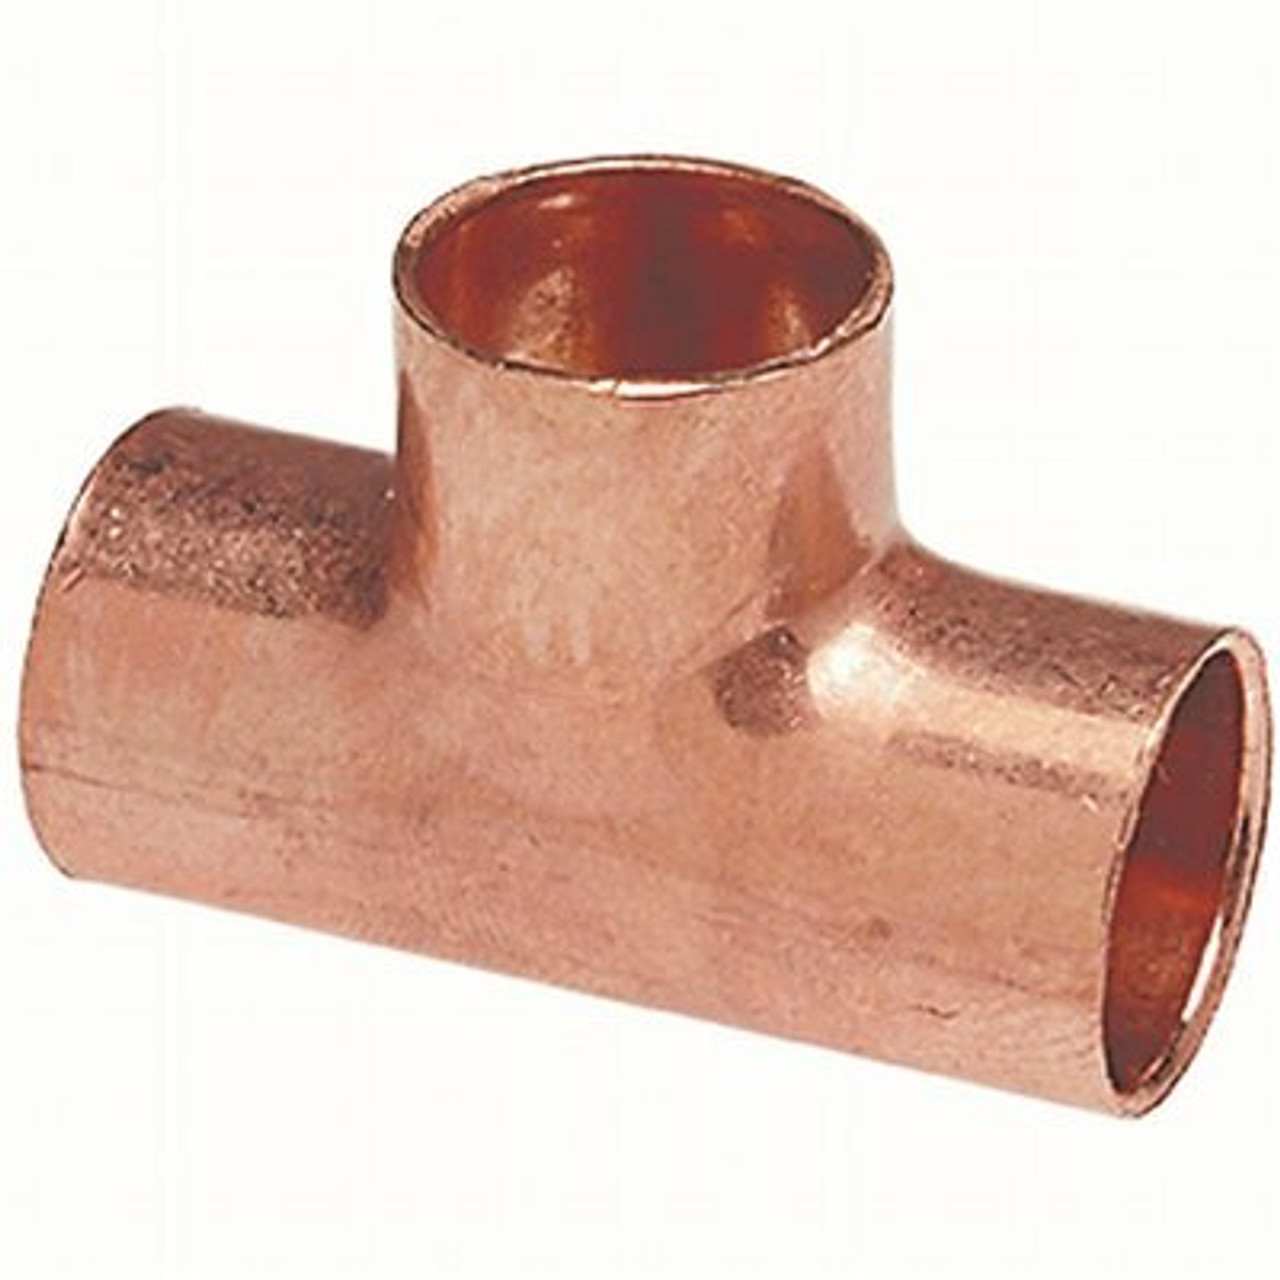 Everbilt 3/4 In. Wrot Copper Tee All Cup Fitting Pro Pack (15-Pack)